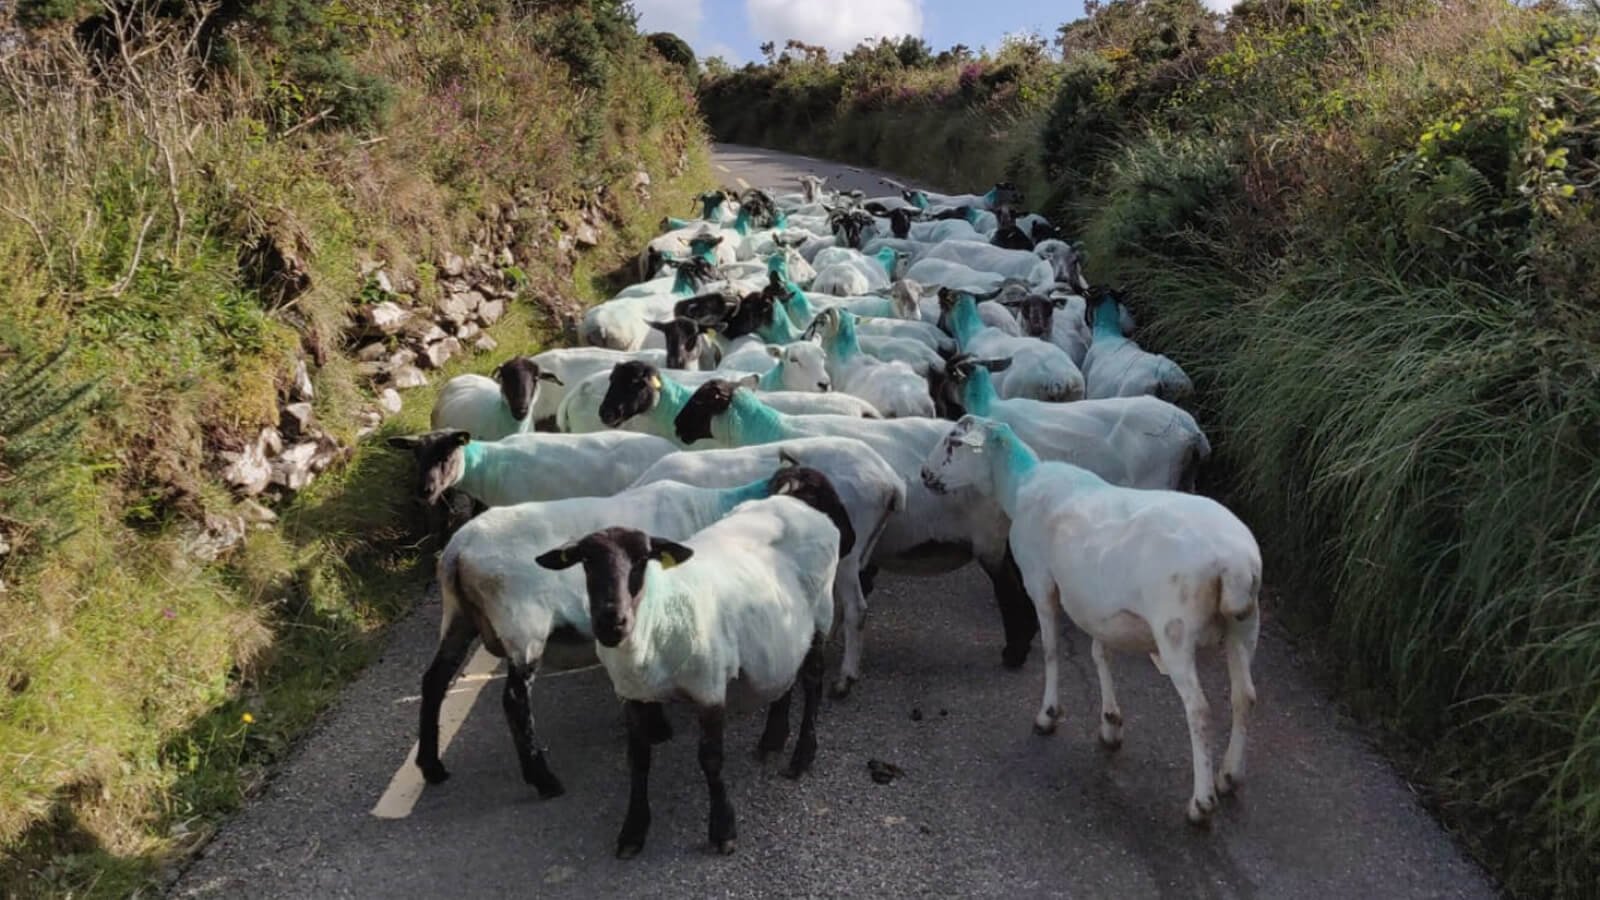 Flock of sheep on a road in Ireland